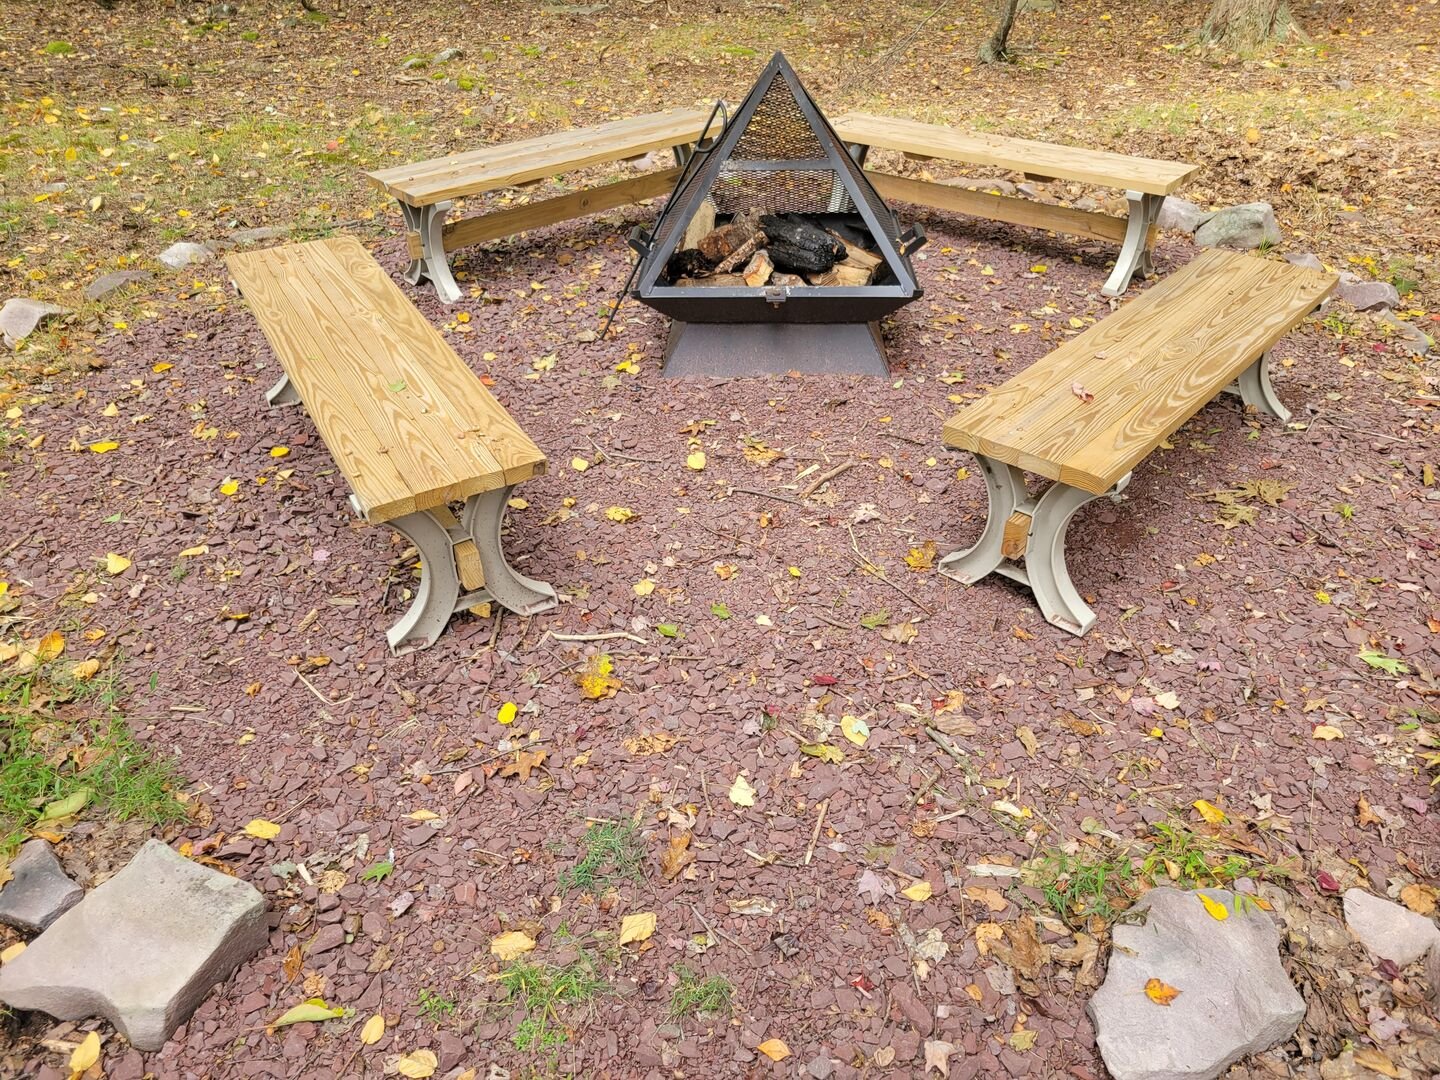 Fire Pit with Bench Seating